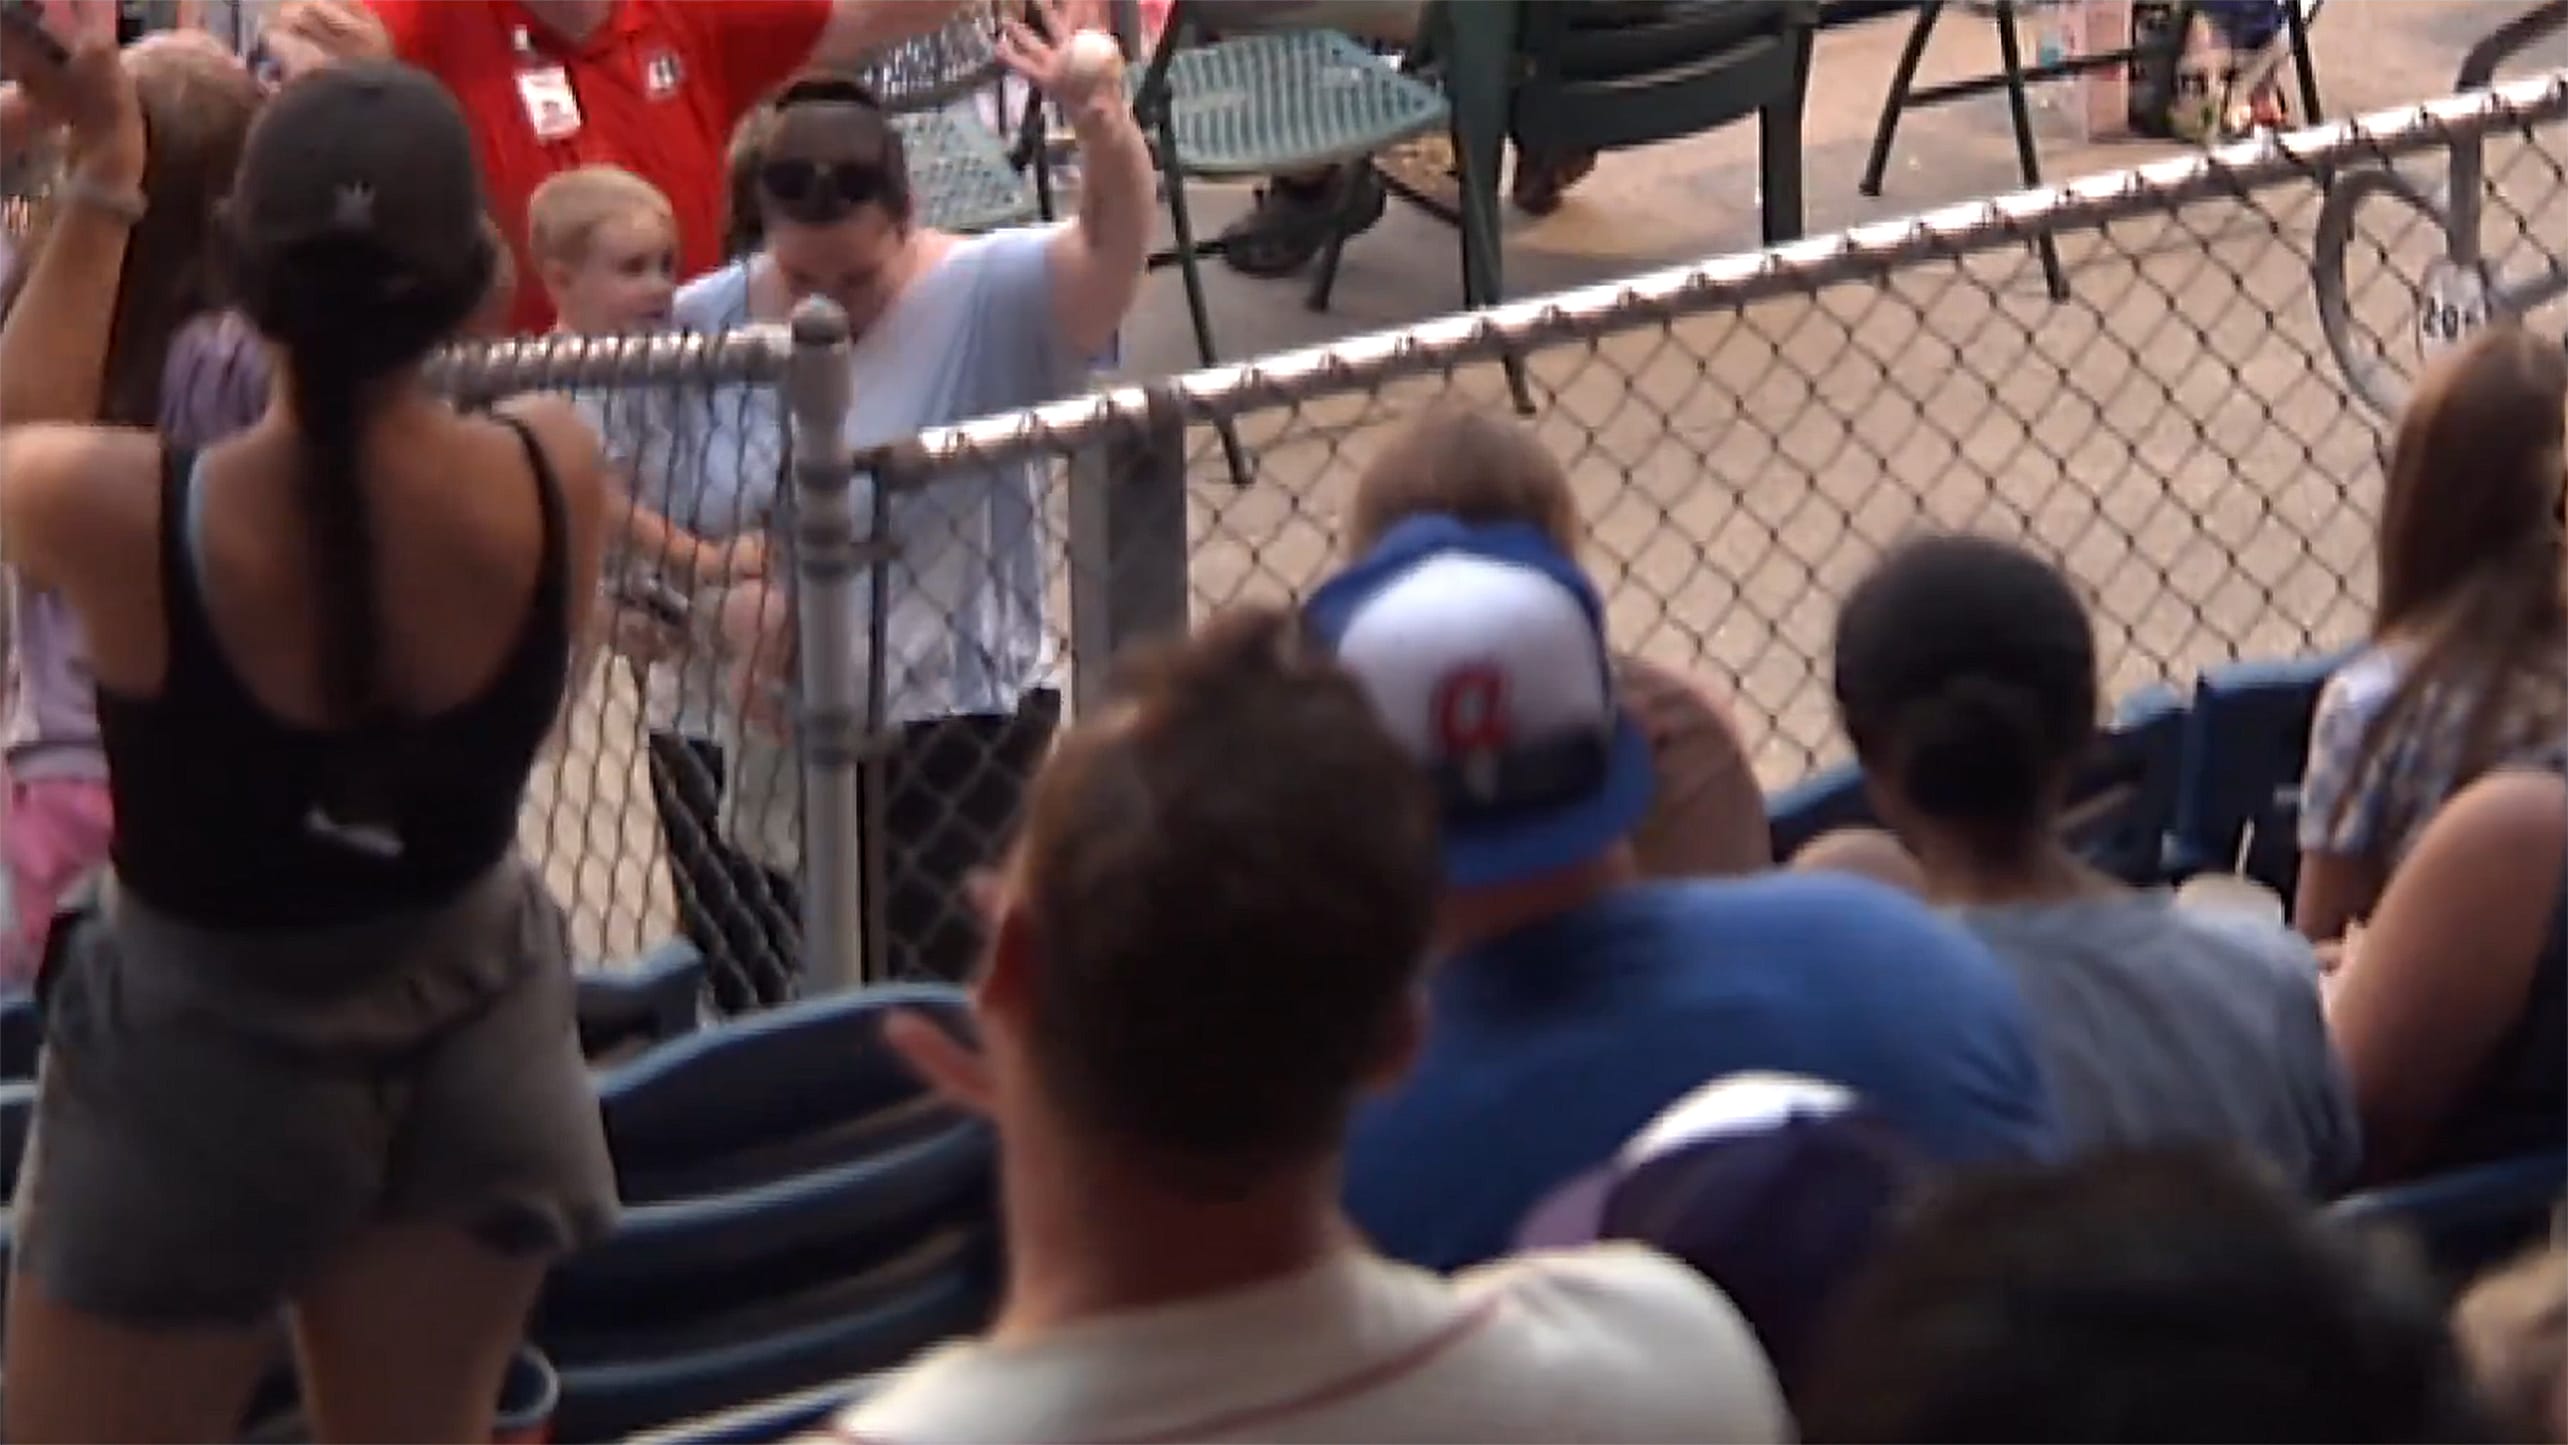 A mother with a child in her arm holds up a foul ball